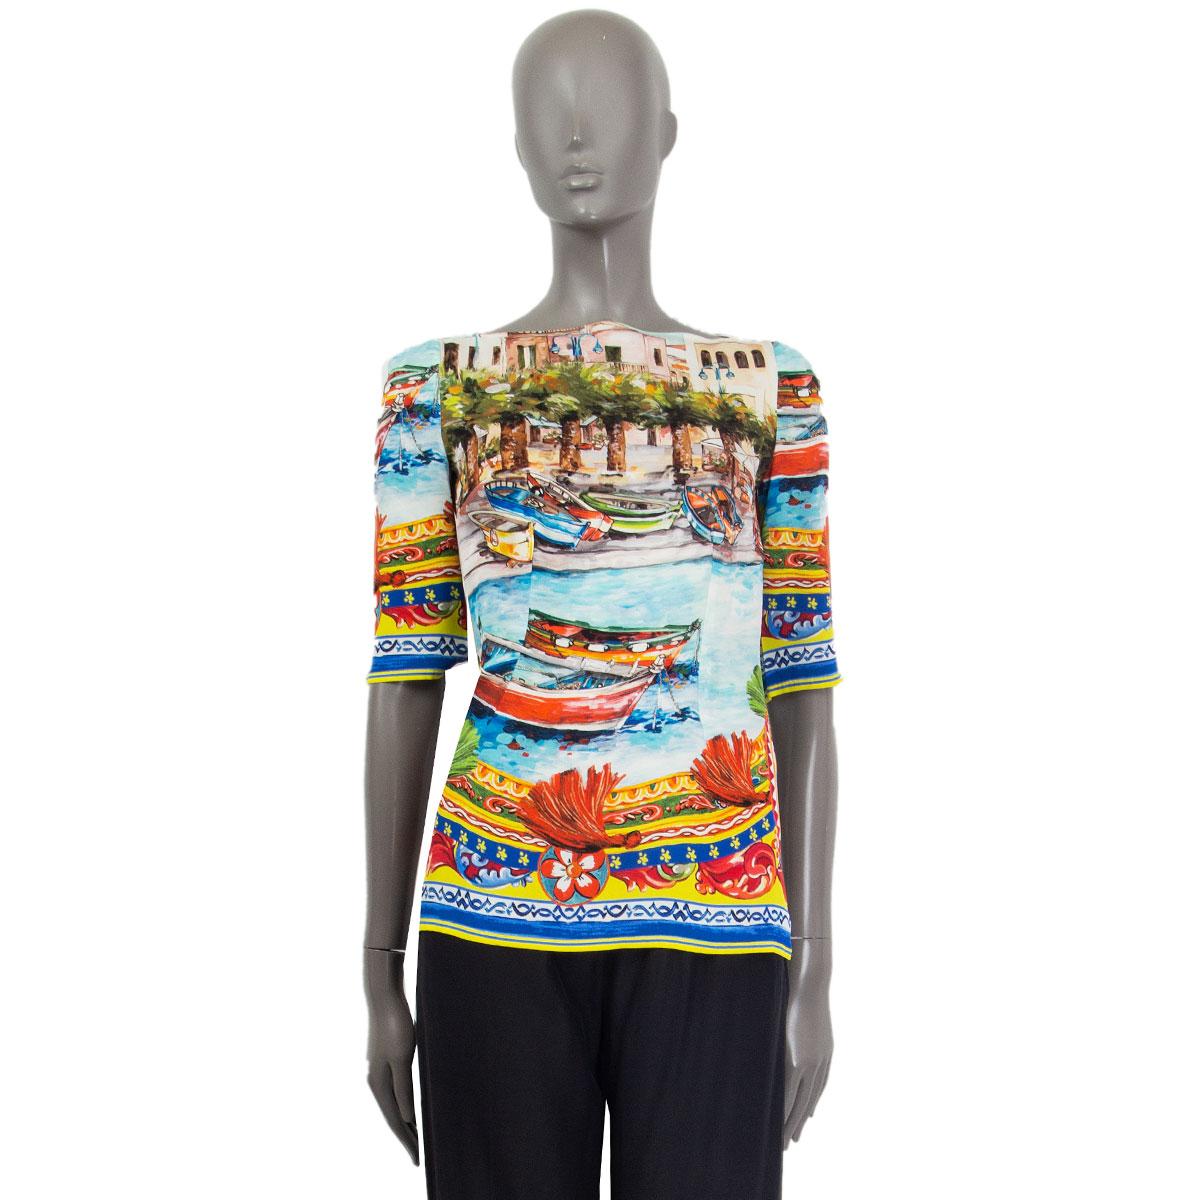 100% authentic Dolce & Gabbana Sorrento printed 3/4 sleeve blouse in yellow, orange, red, green, olive green, blue, light blue, grey and off-white silk (94%) and elastane (6%). Opens with a zipper on the back. Has been worn and is in excellent